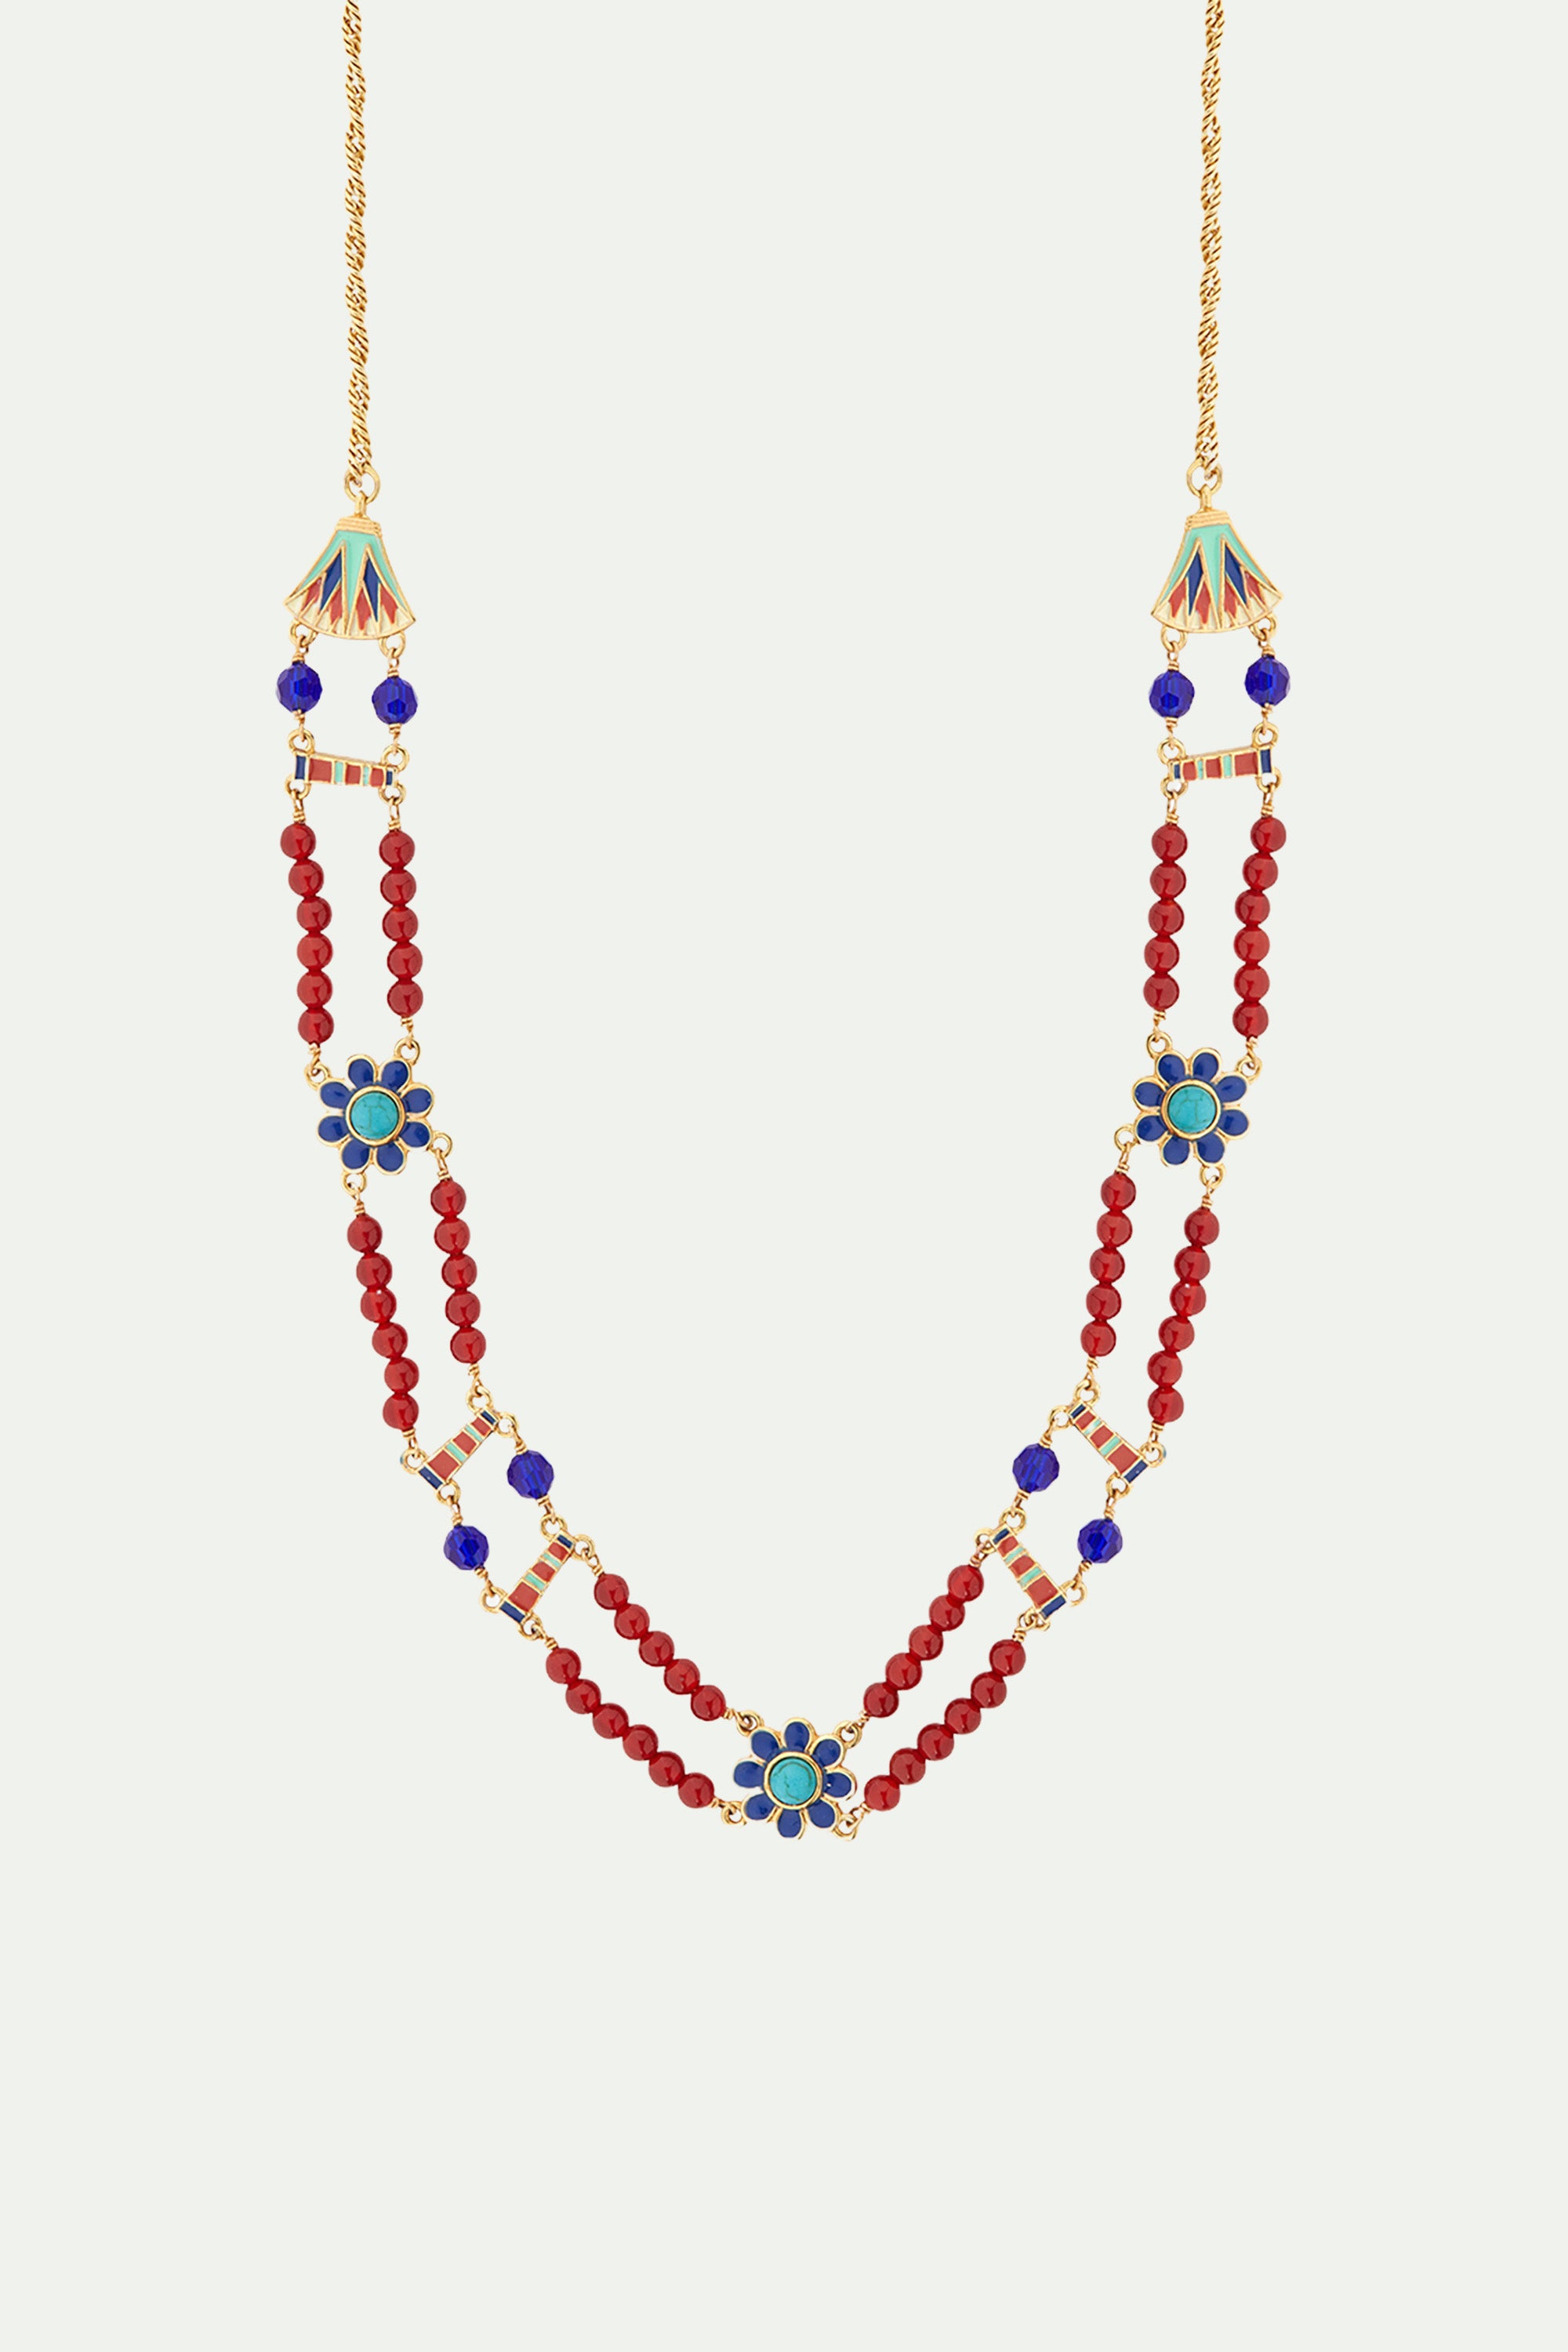 Mystery of the Nile statement necklace